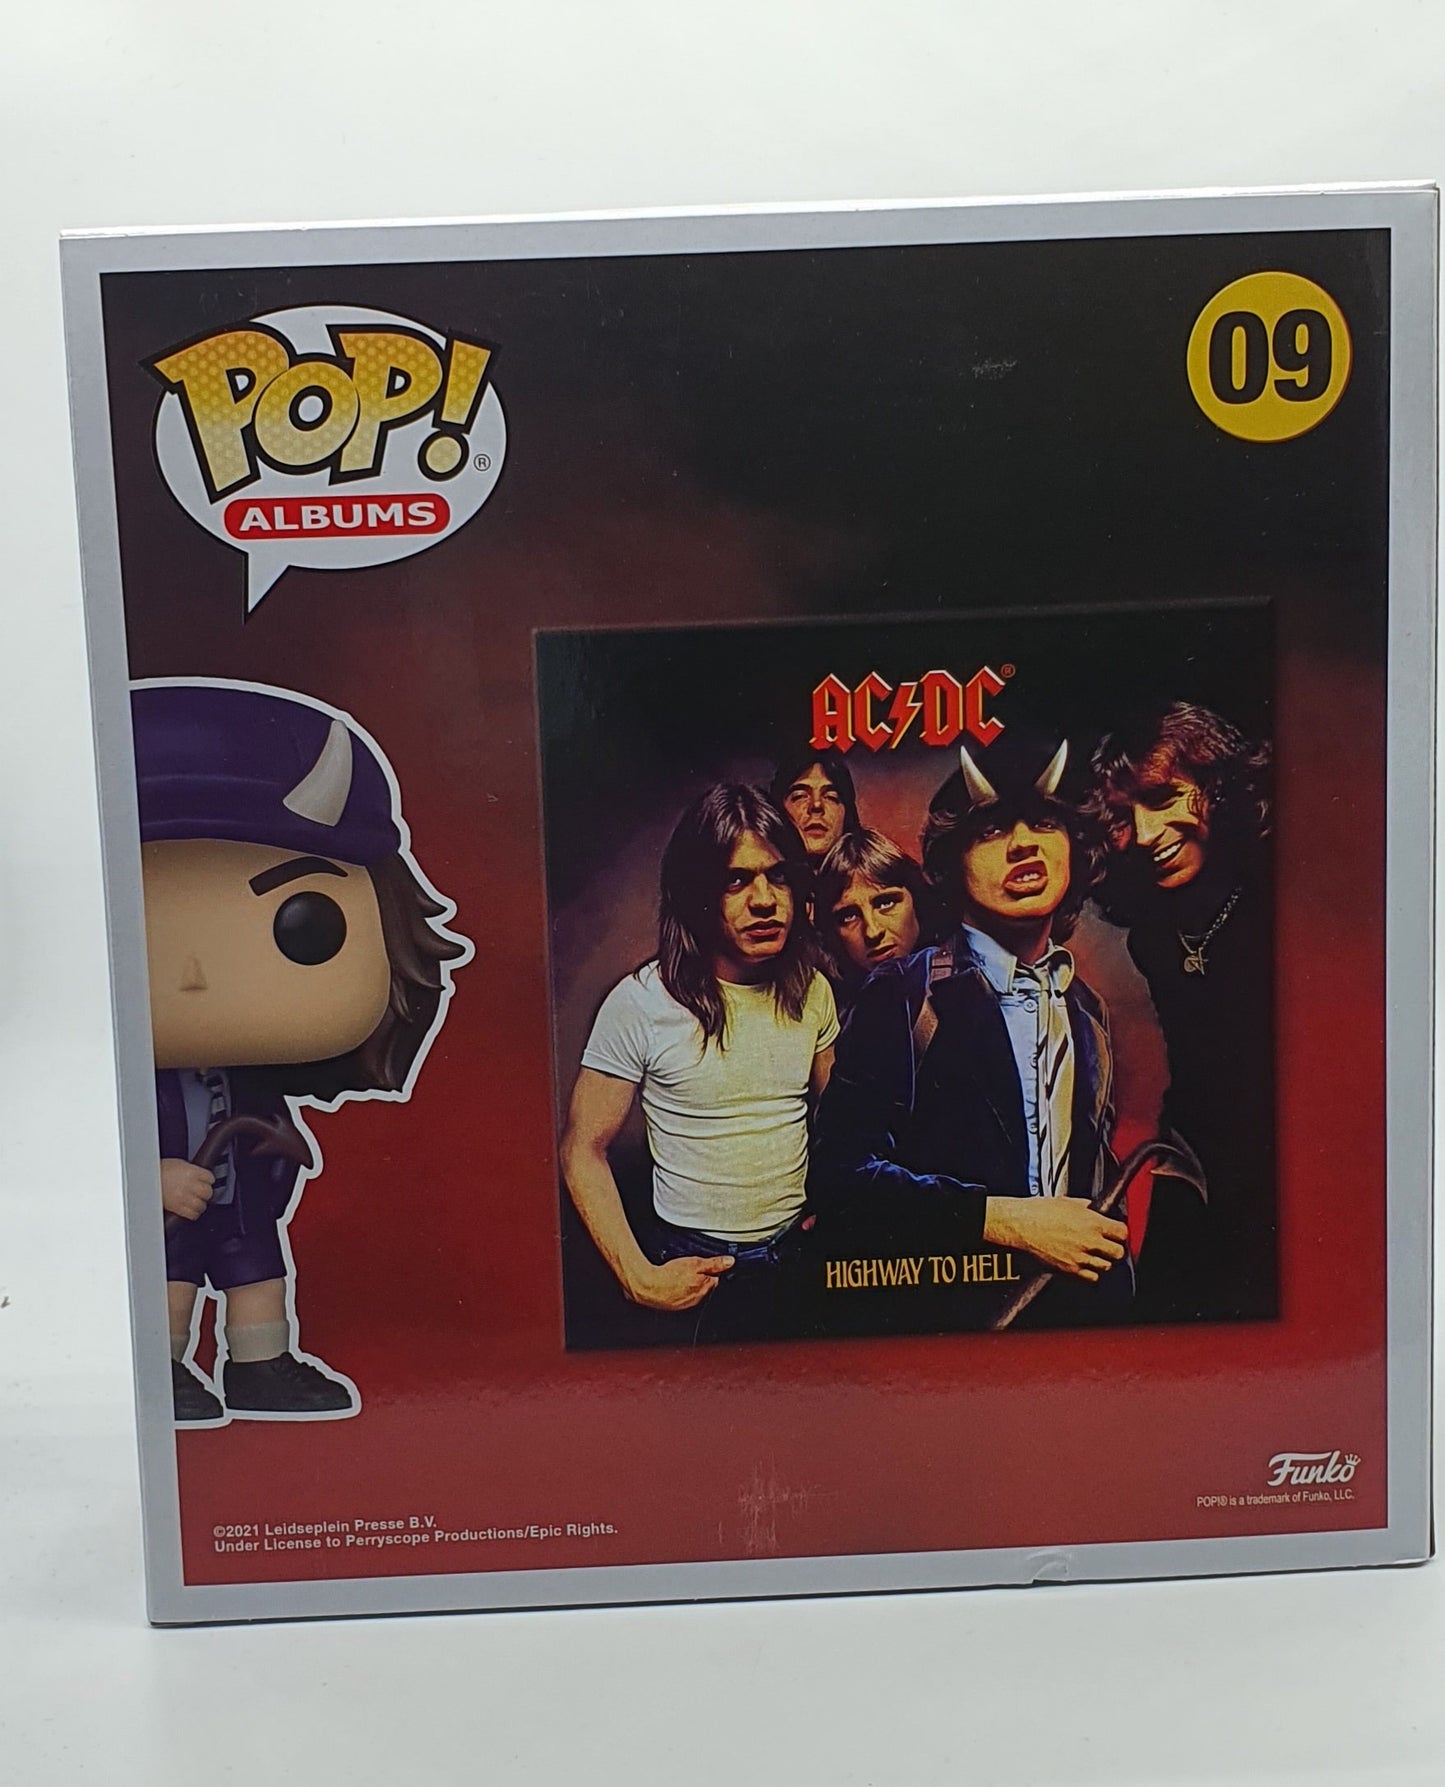 09 - ALBUMS - ACDC - HIGHWAY TO HELL